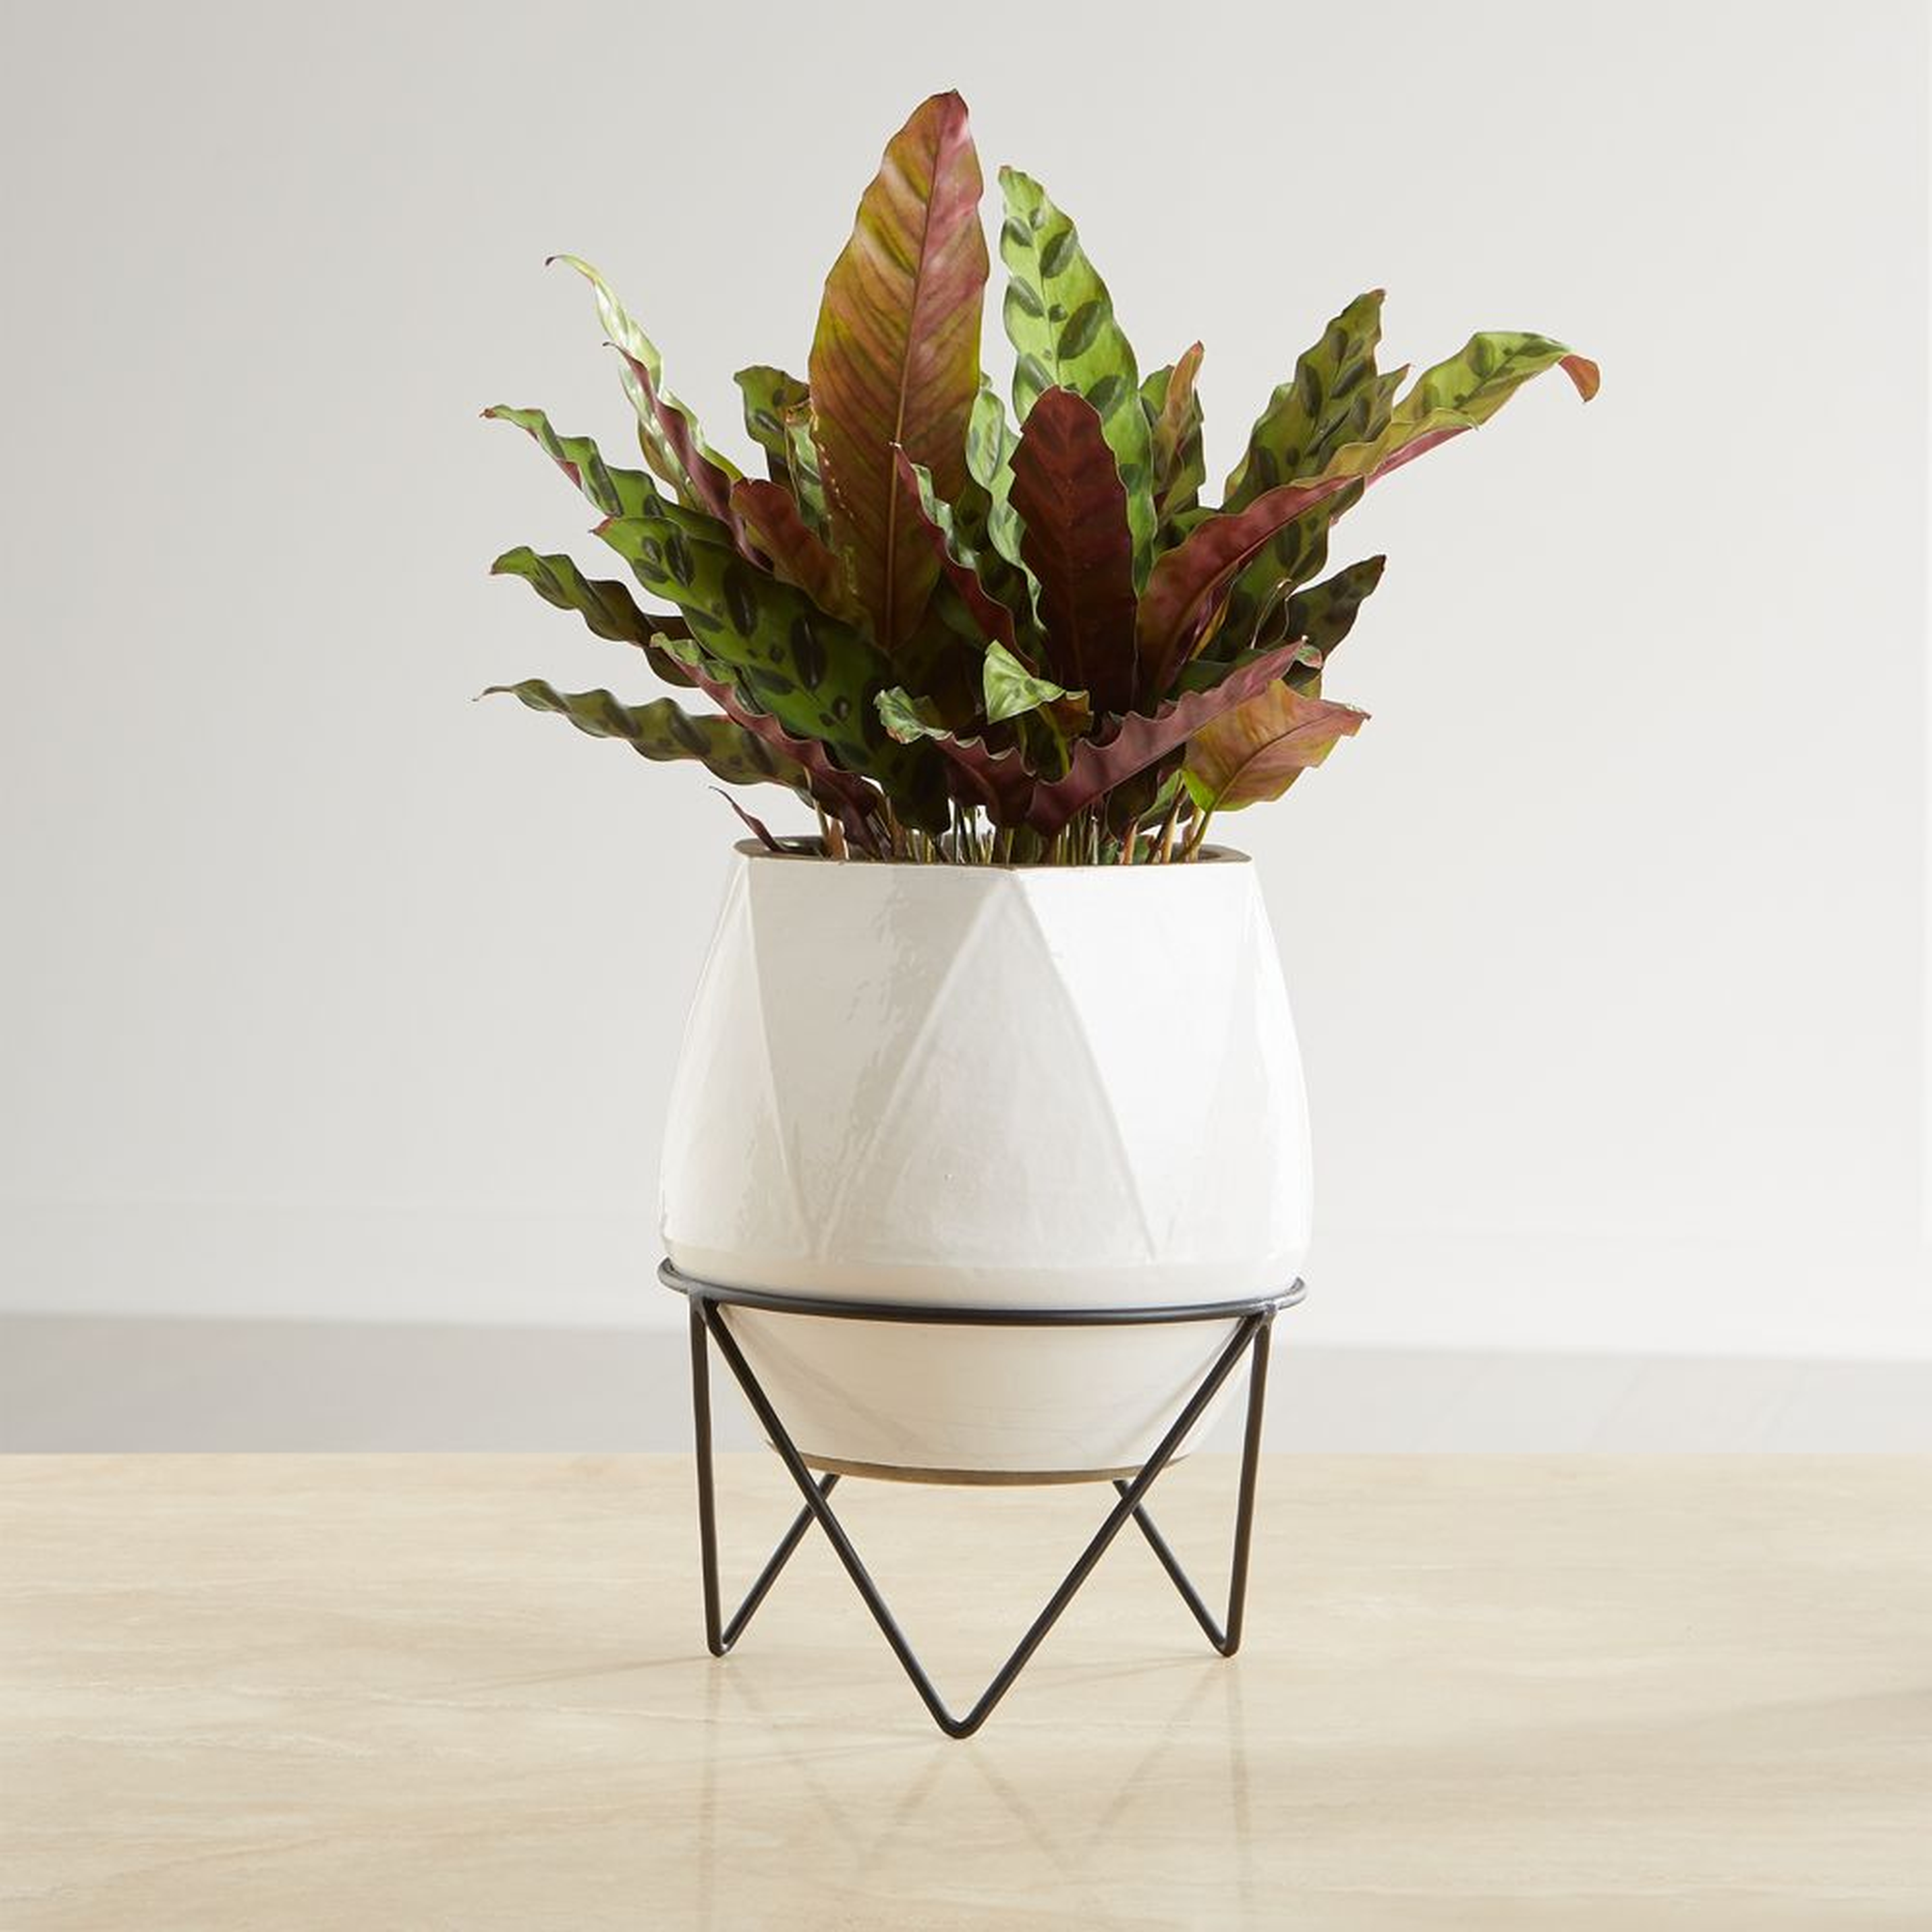 Aaro Medium Geo Planter with Stand - Crate and Barrel